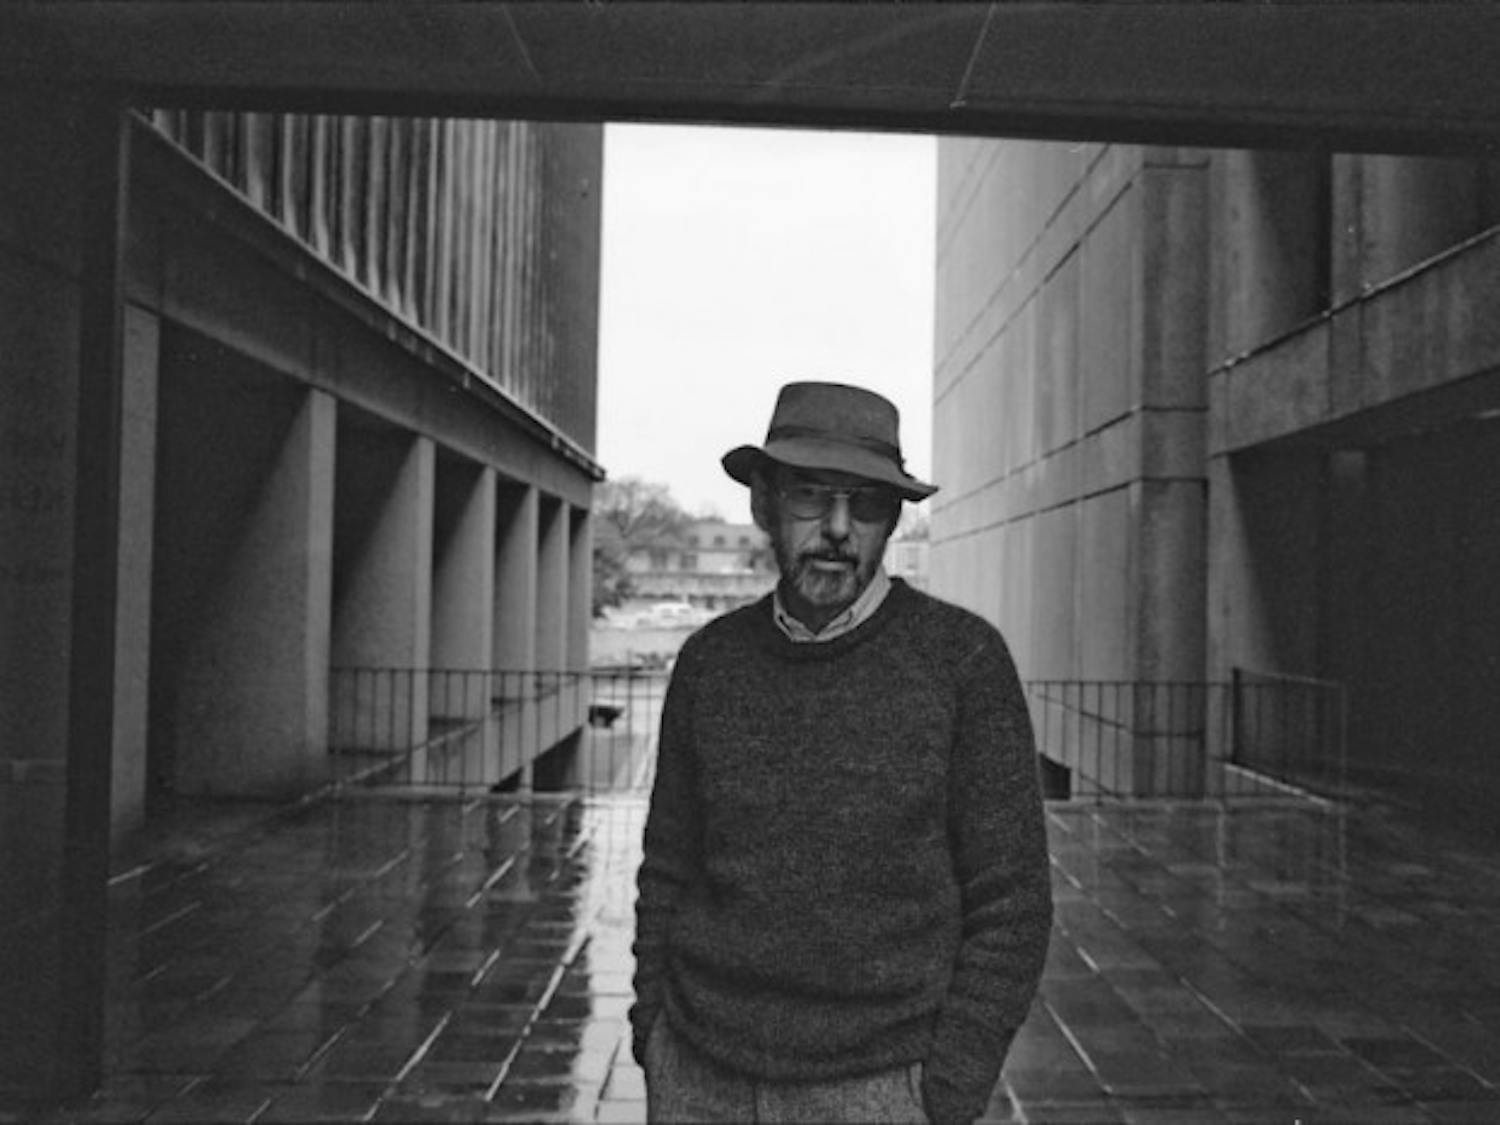 Robert Creeley, one of the founders of UB&rsquo;s Poetics Program, in classic Beat style at the University of Texas.&nbsp;Courtesy of S&eacute;bastien Bertrand 